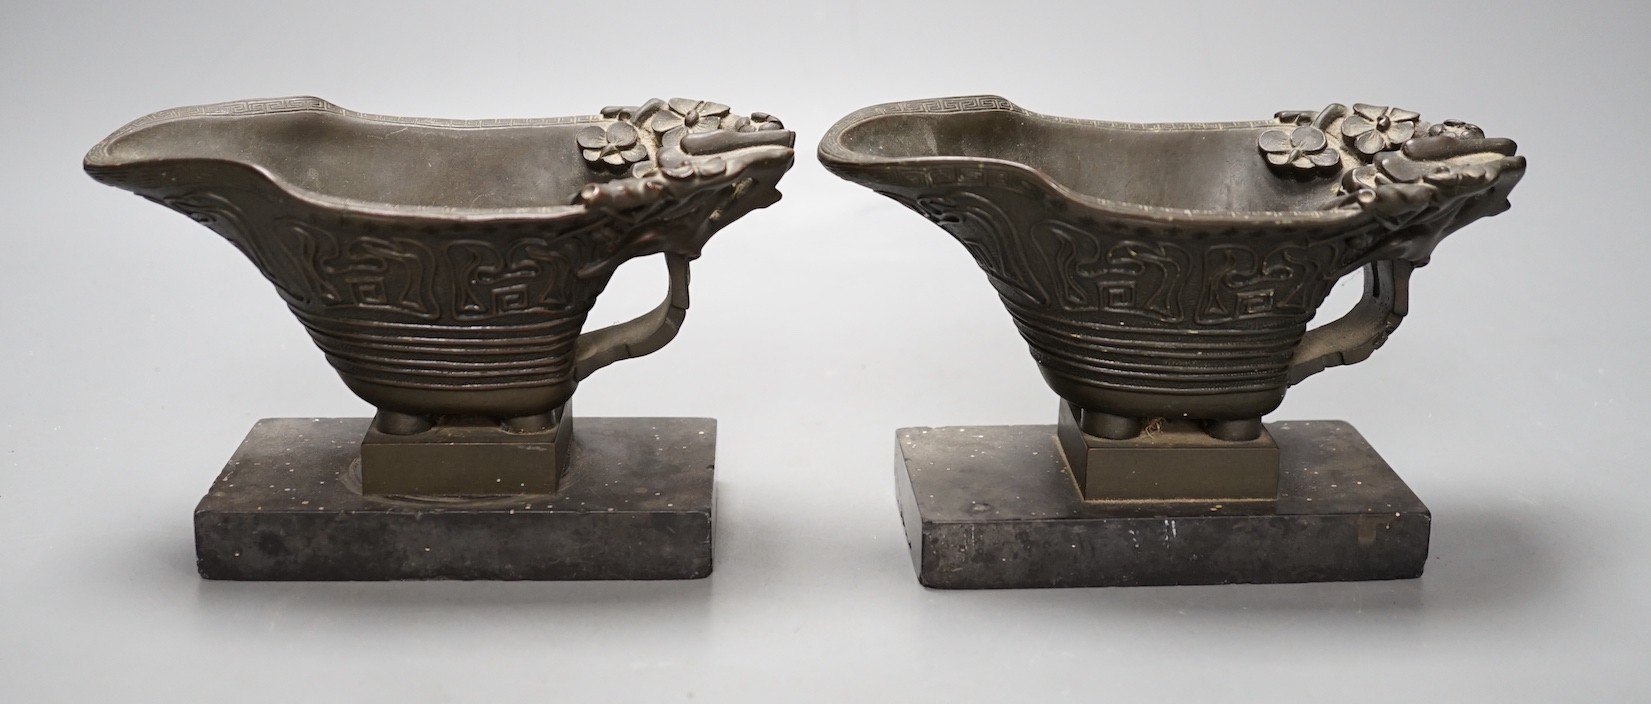 A pair of 19th century French bronze models of Chinese libation cups - 10cm tall